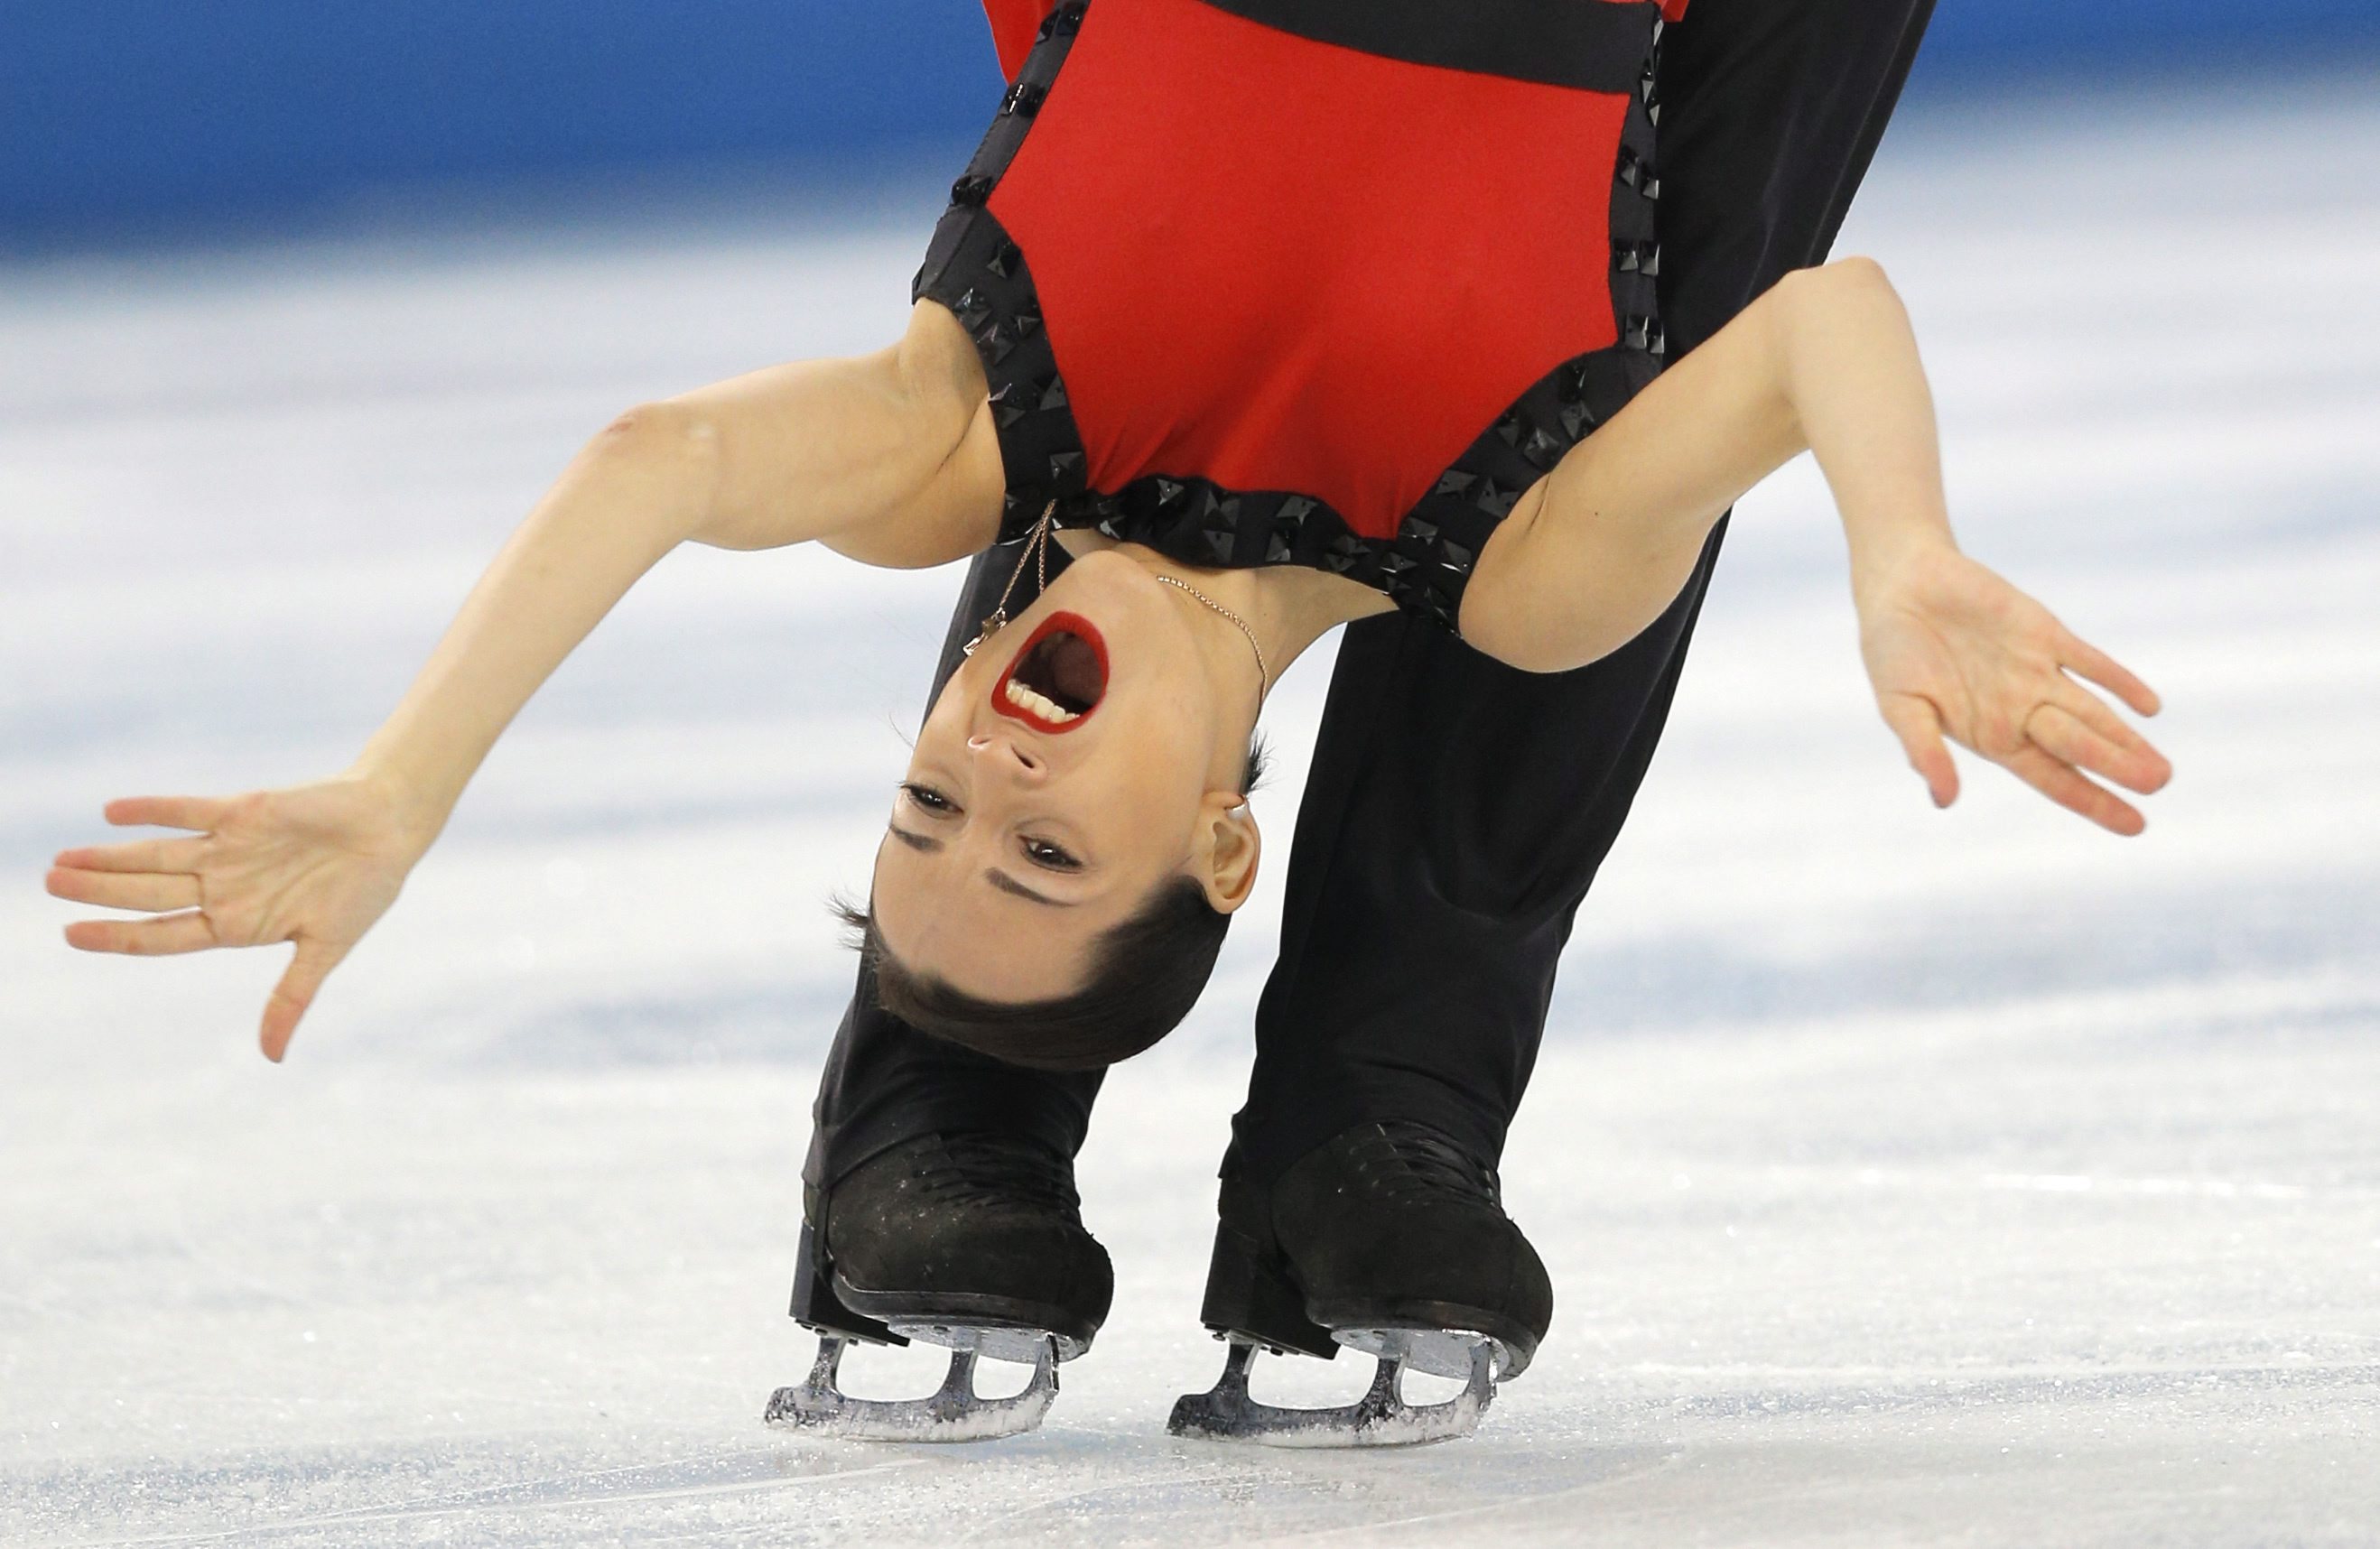 Holders Of Gold And Silver Medals Russian Skaters Fedor Klimov And Ksenia Stolbova At The